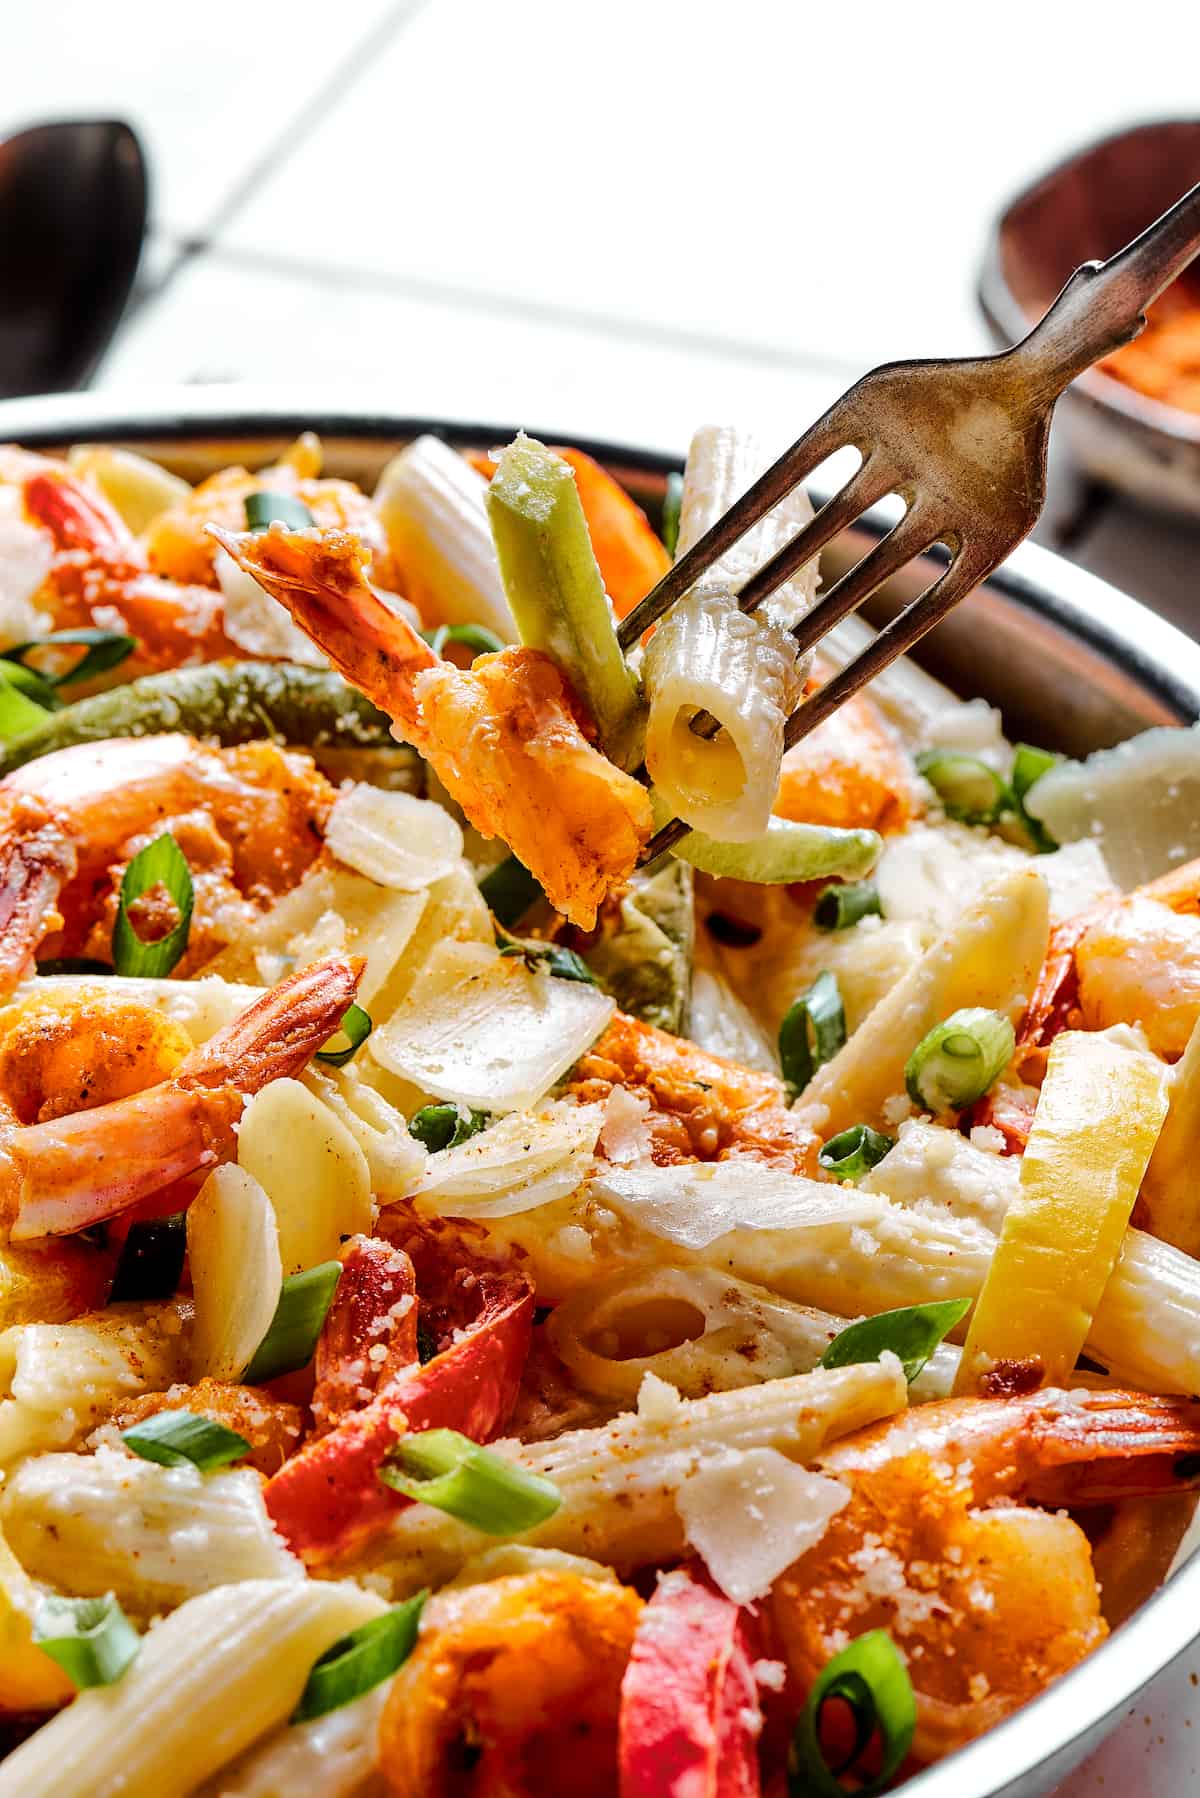 A fork lifting pasta and bell peppers from a creamy pasta dish.